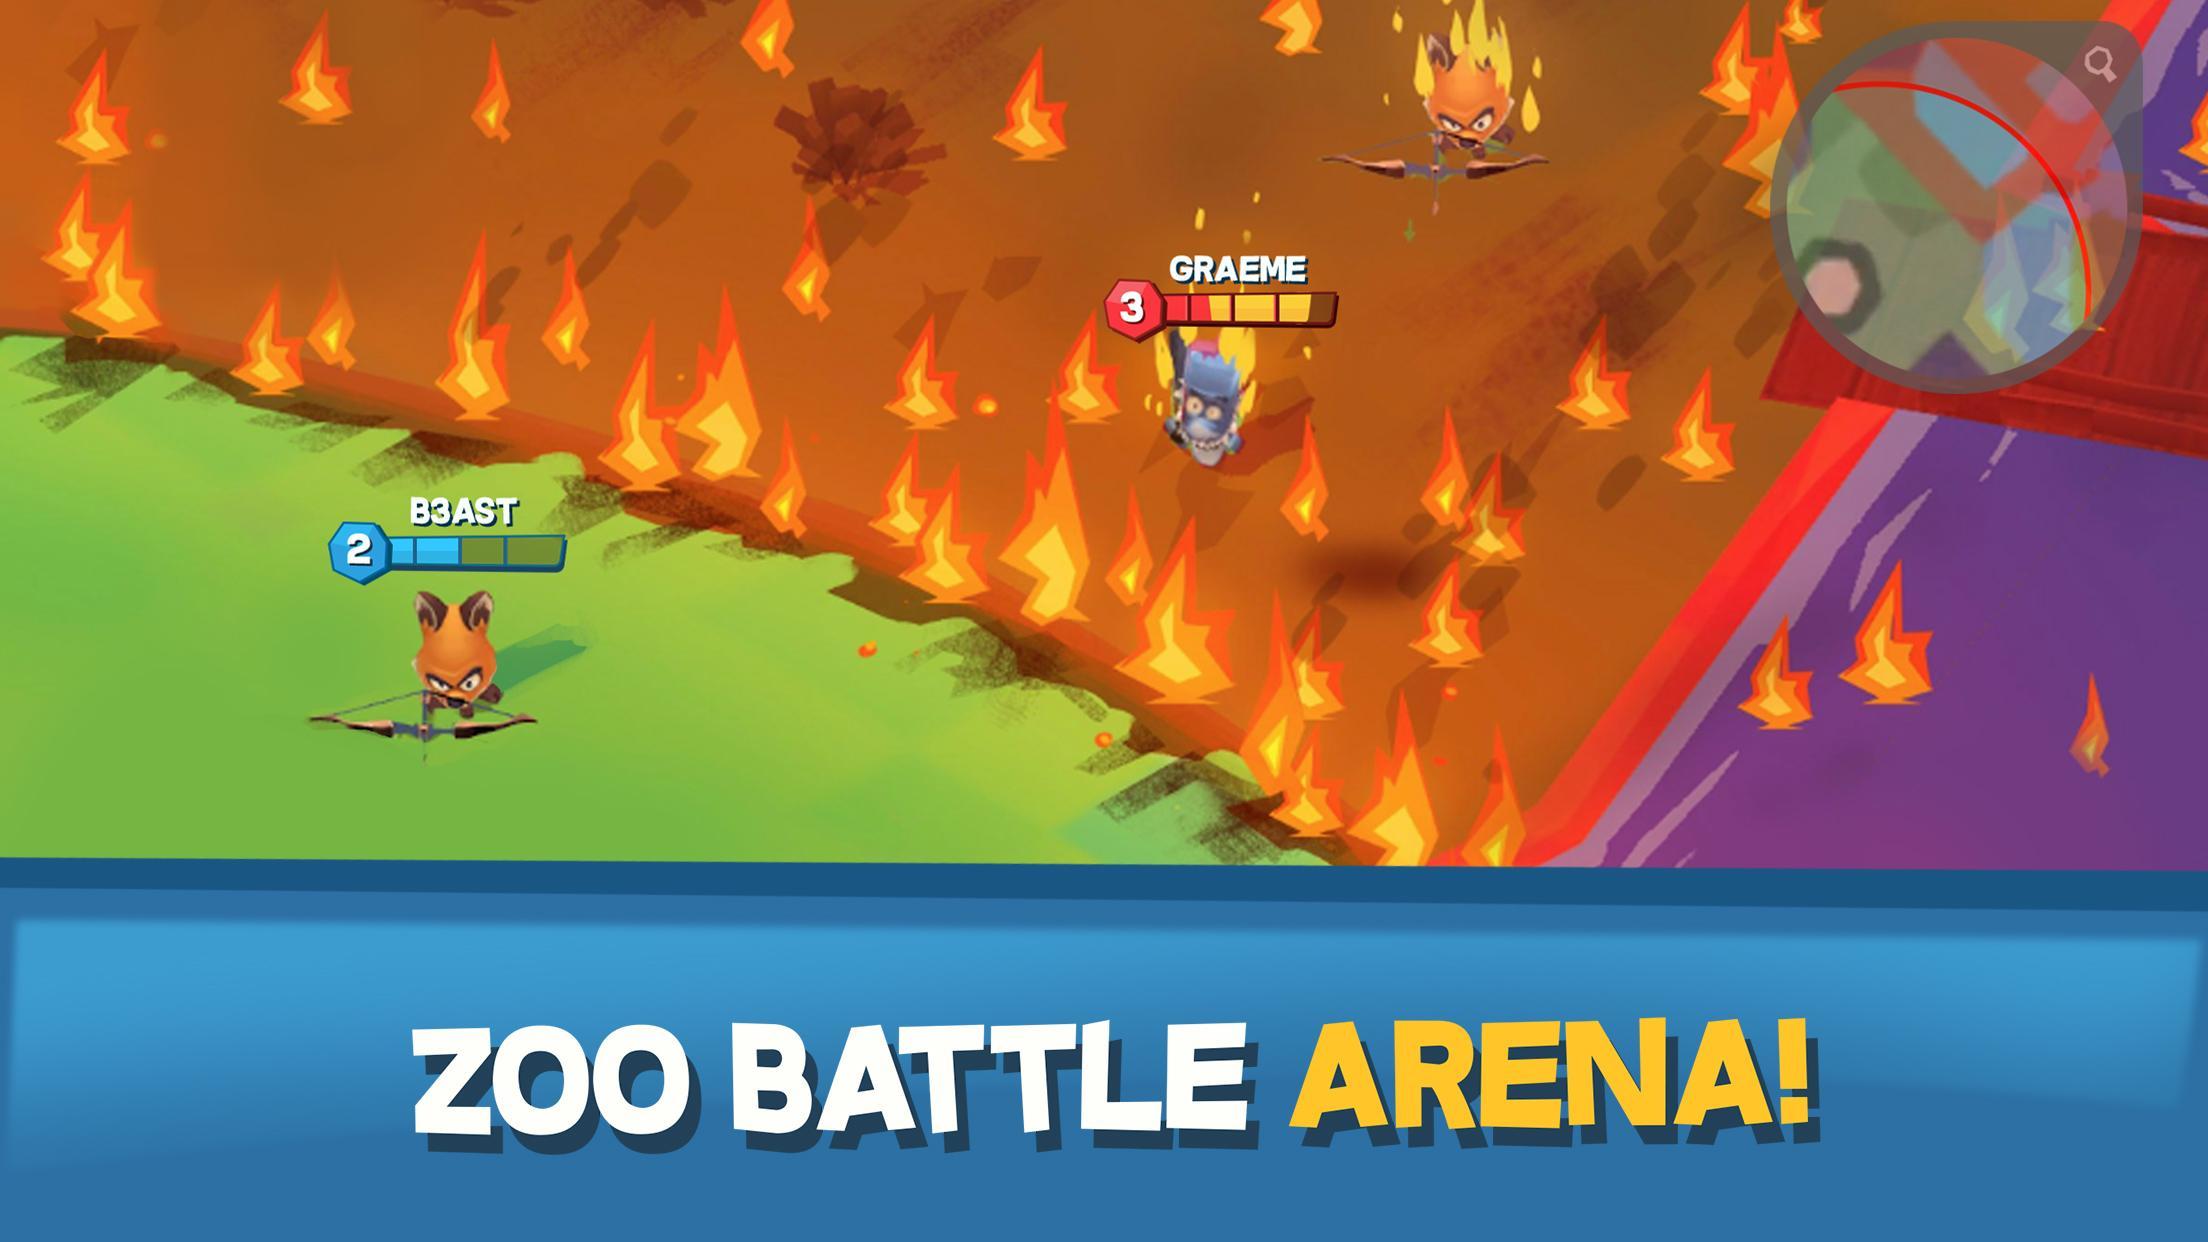 Zooba Free-for-all Zoo Combat Battle Royale Games 2.6 Screenshot 11